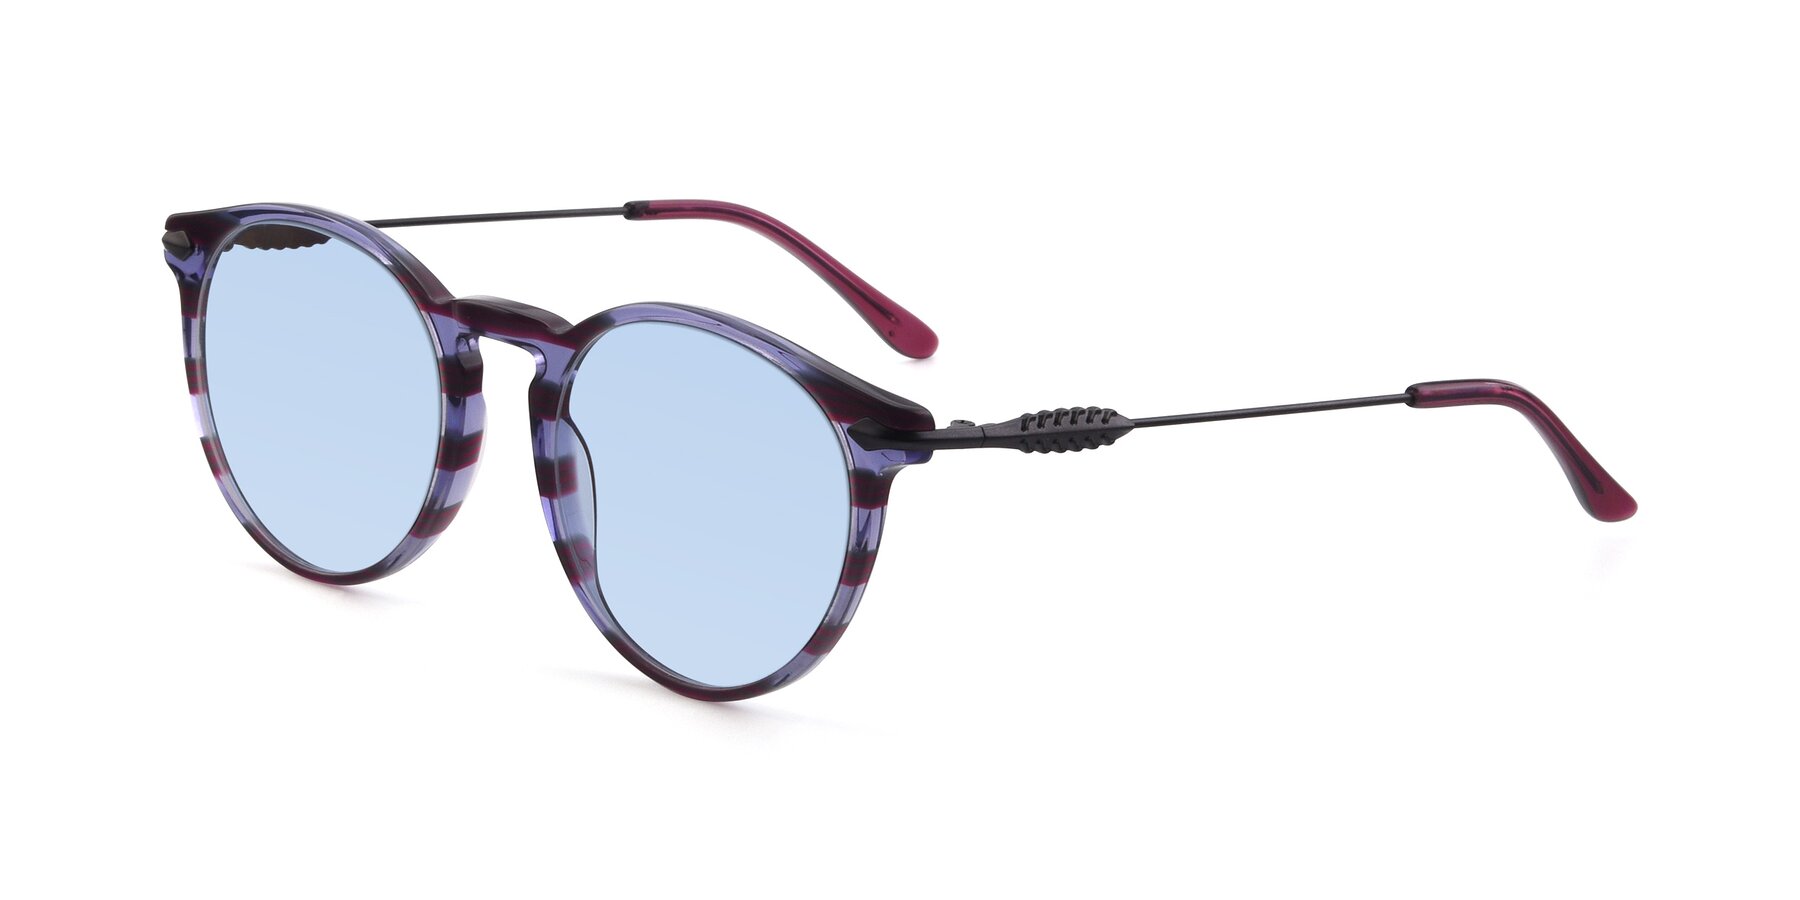 Angle of 17660 in Stripe Purple with Light Blue Tinted Lenses